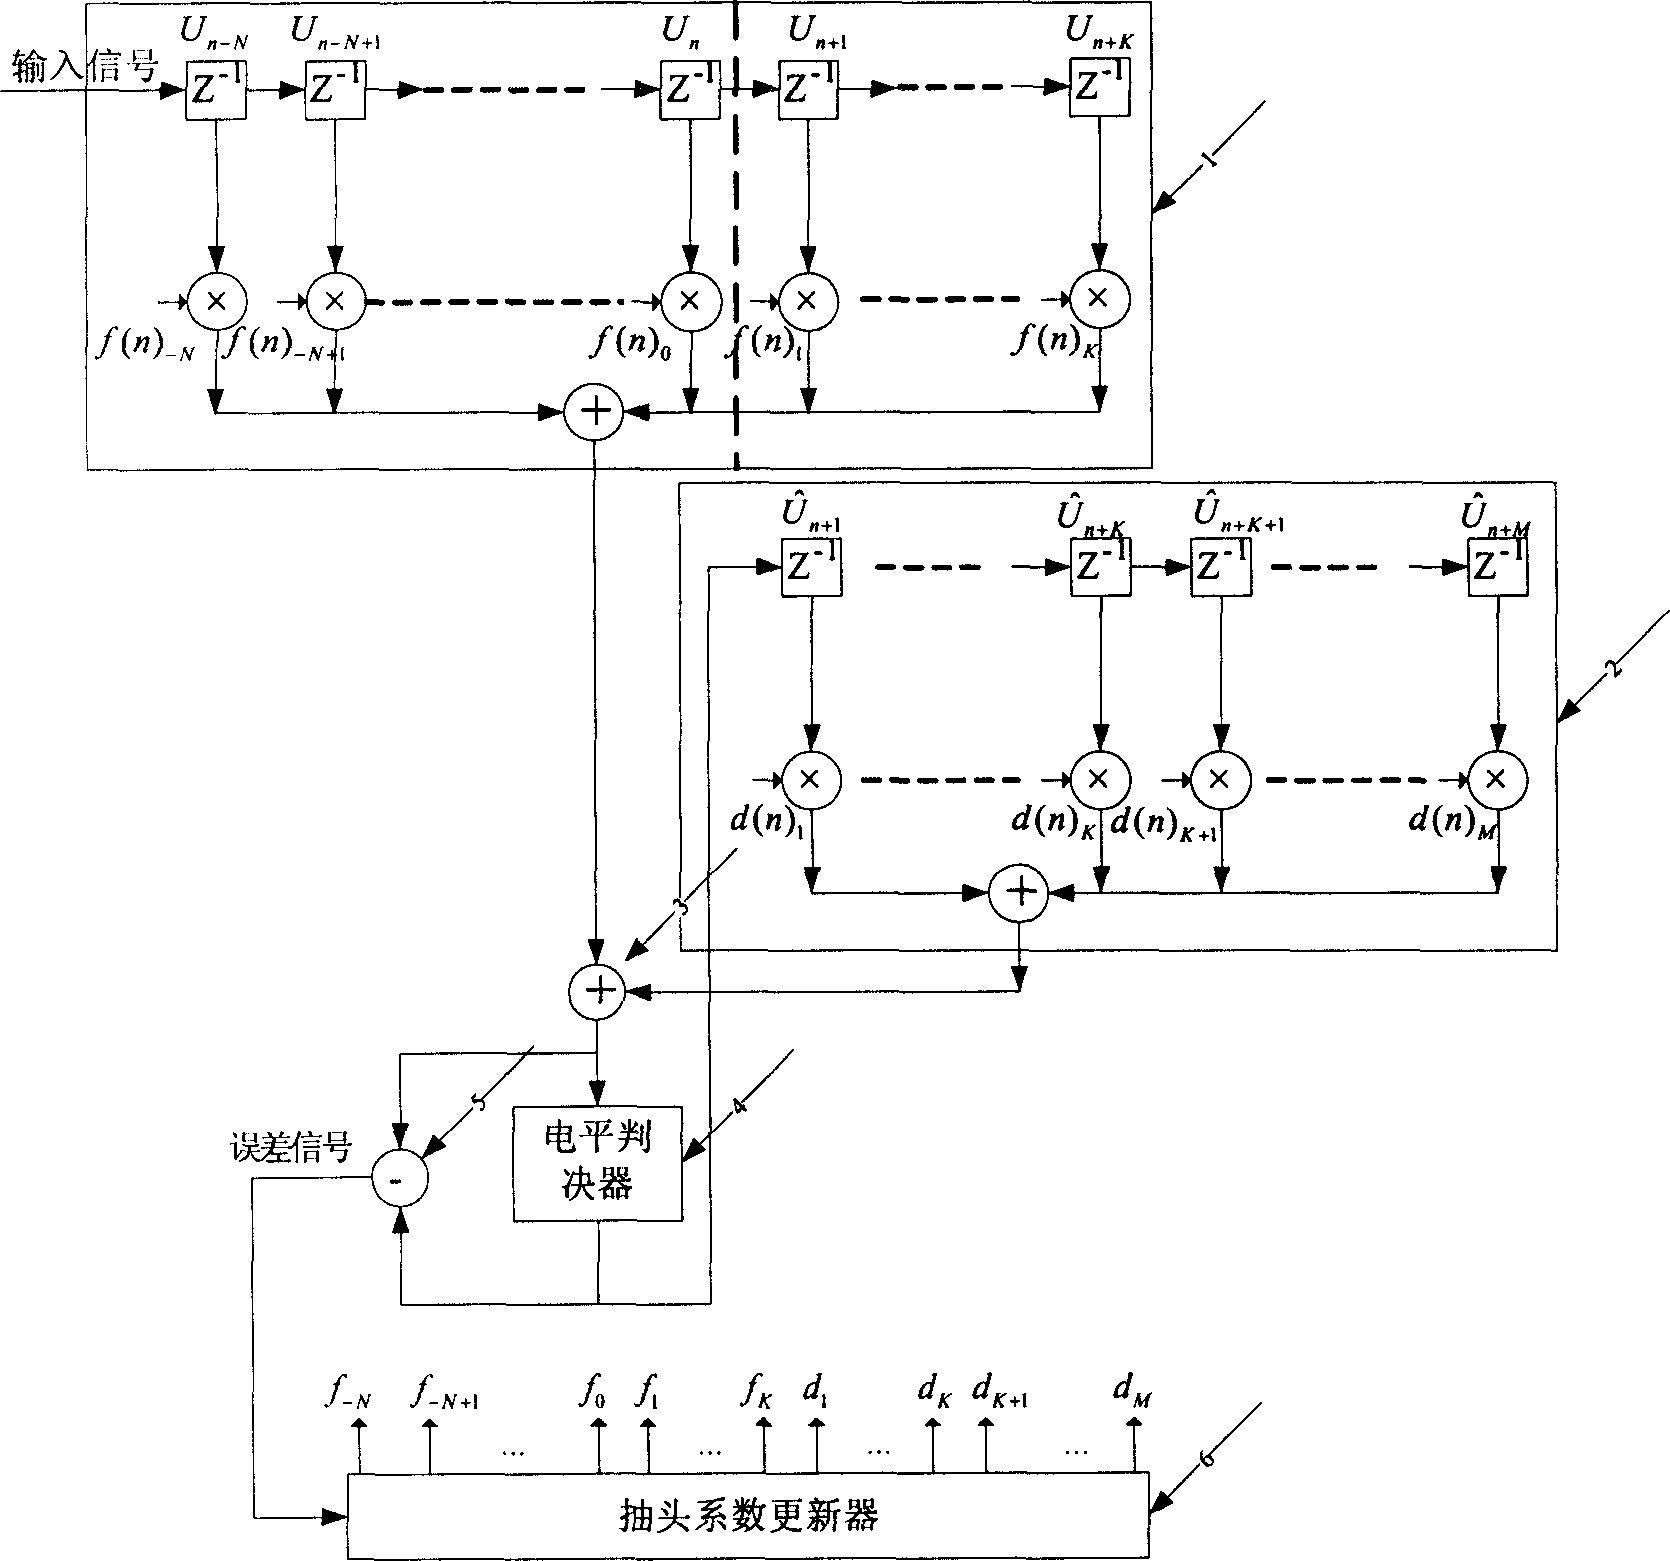 Time-domain adaptive equalizer with overlay structure